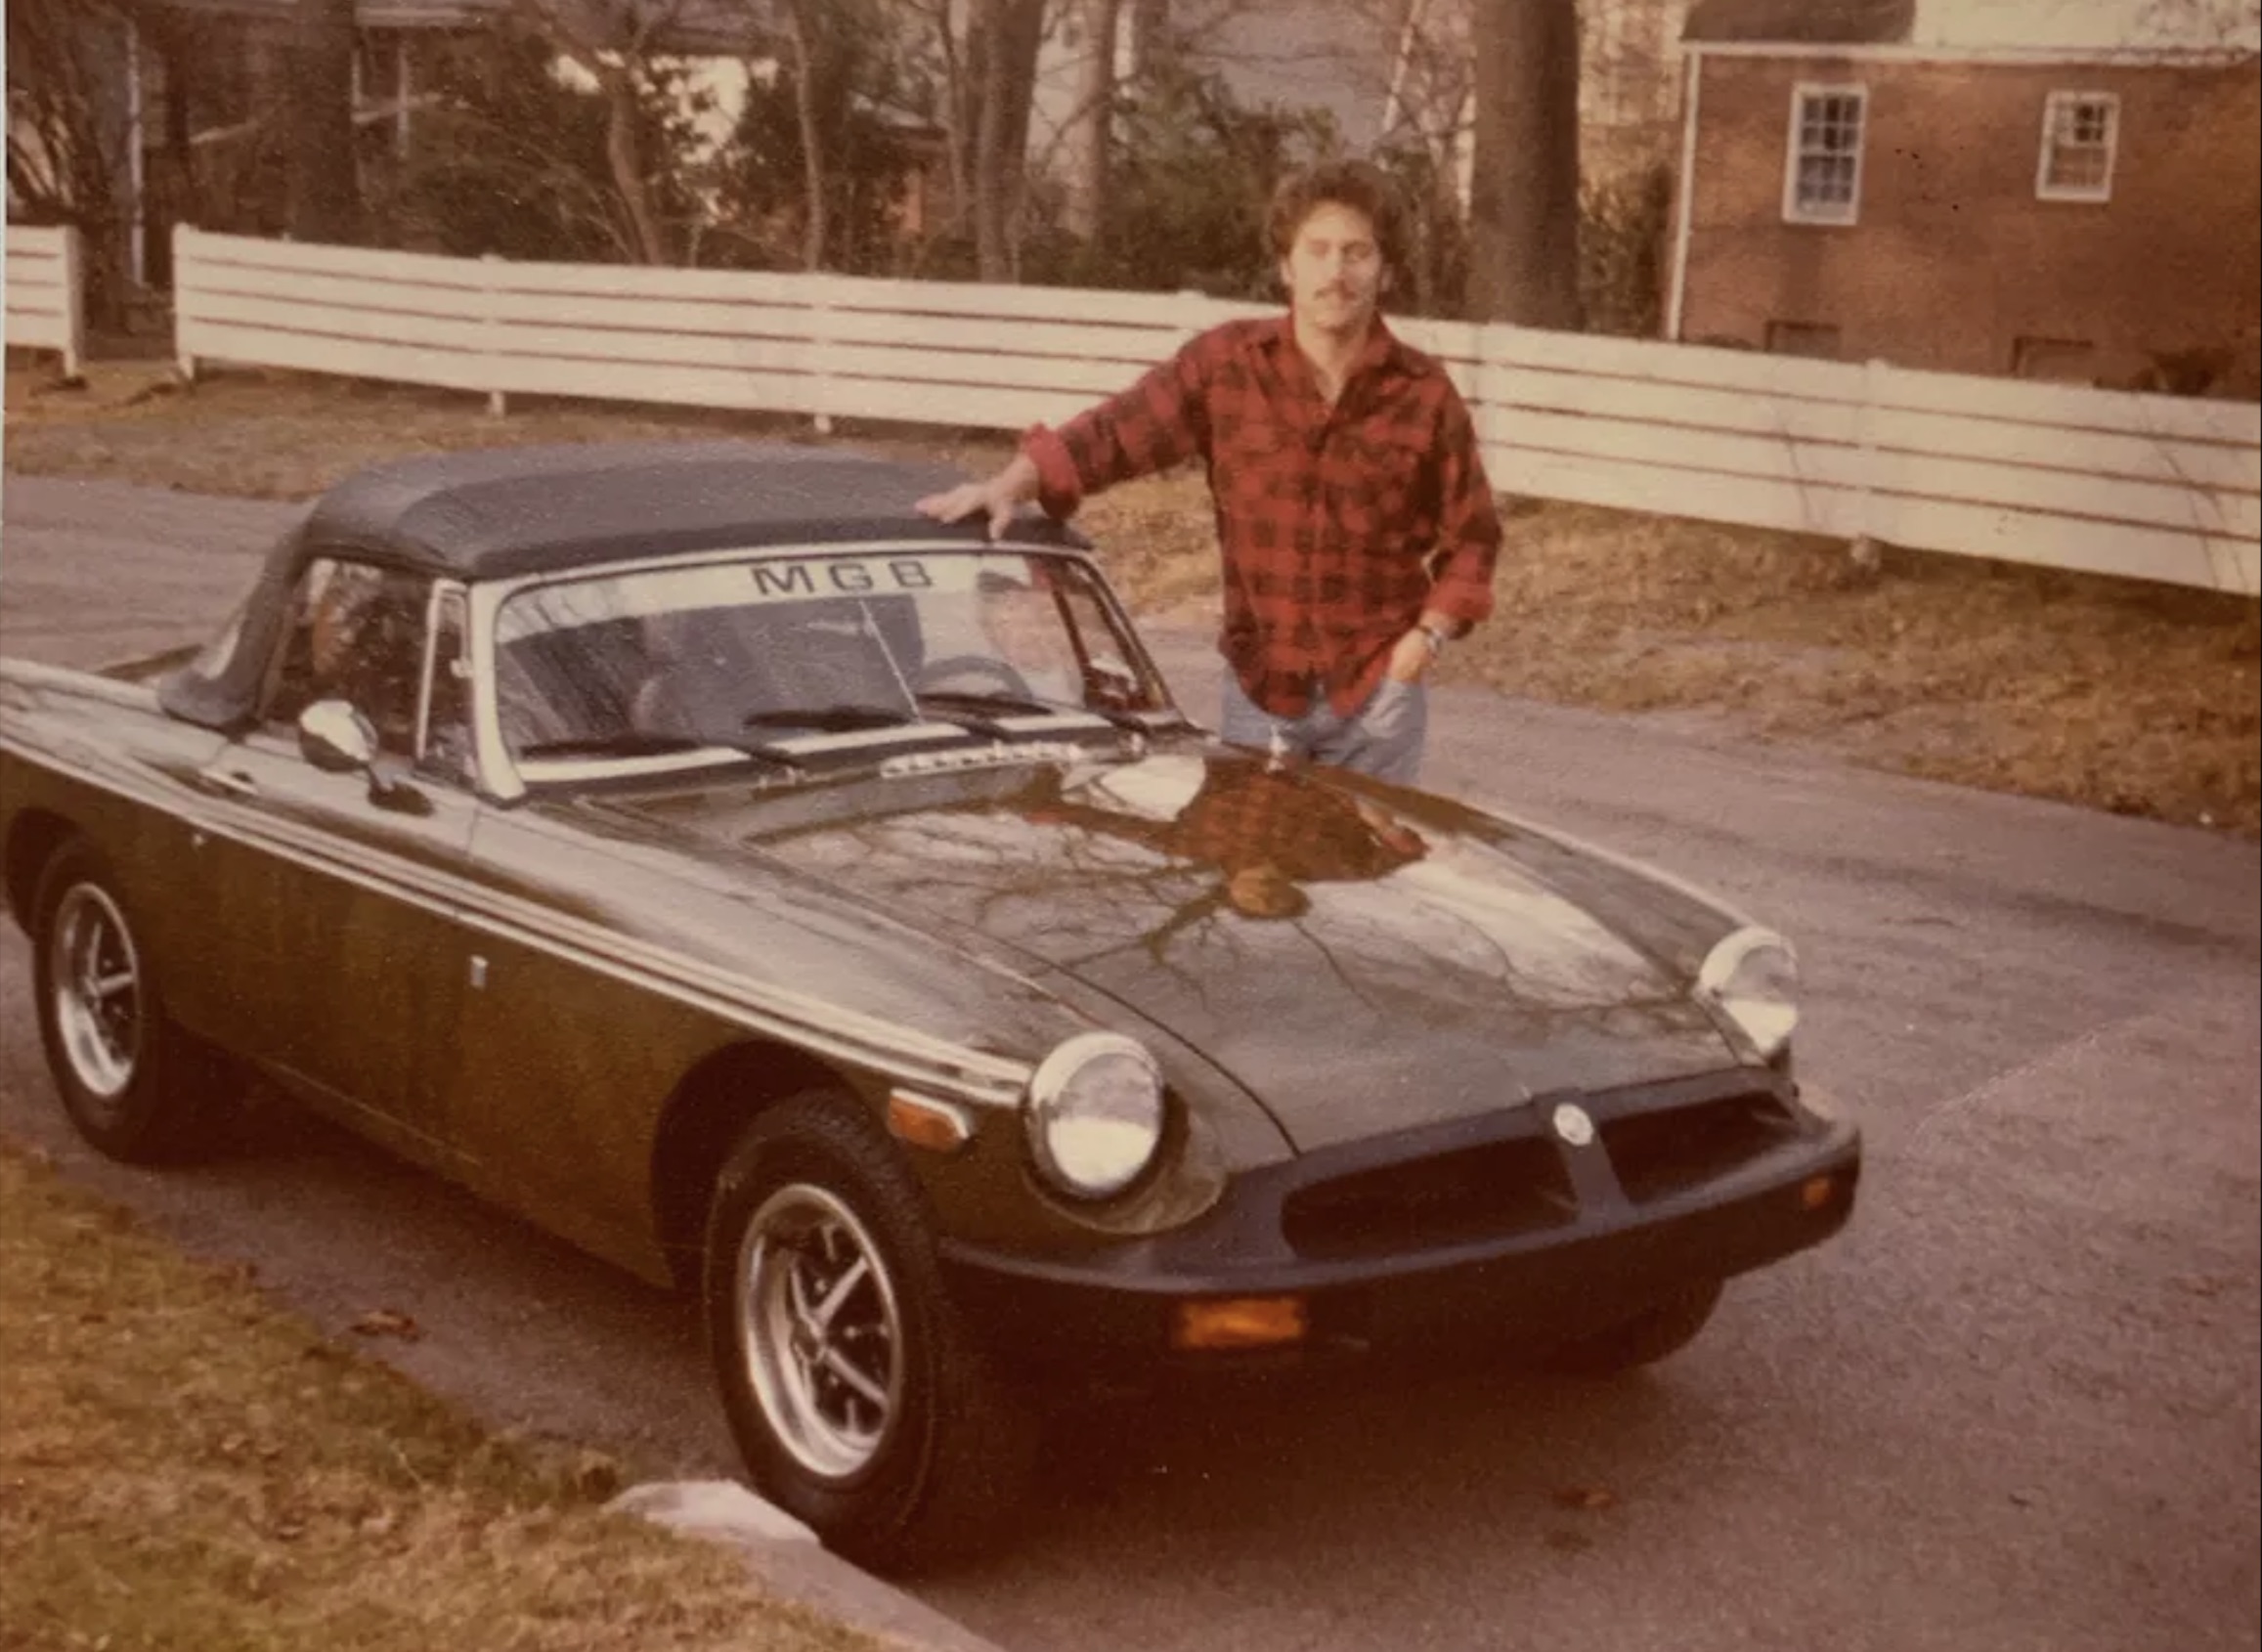 Original Owner: A 12-year-old saves to buy a new MGB at 16